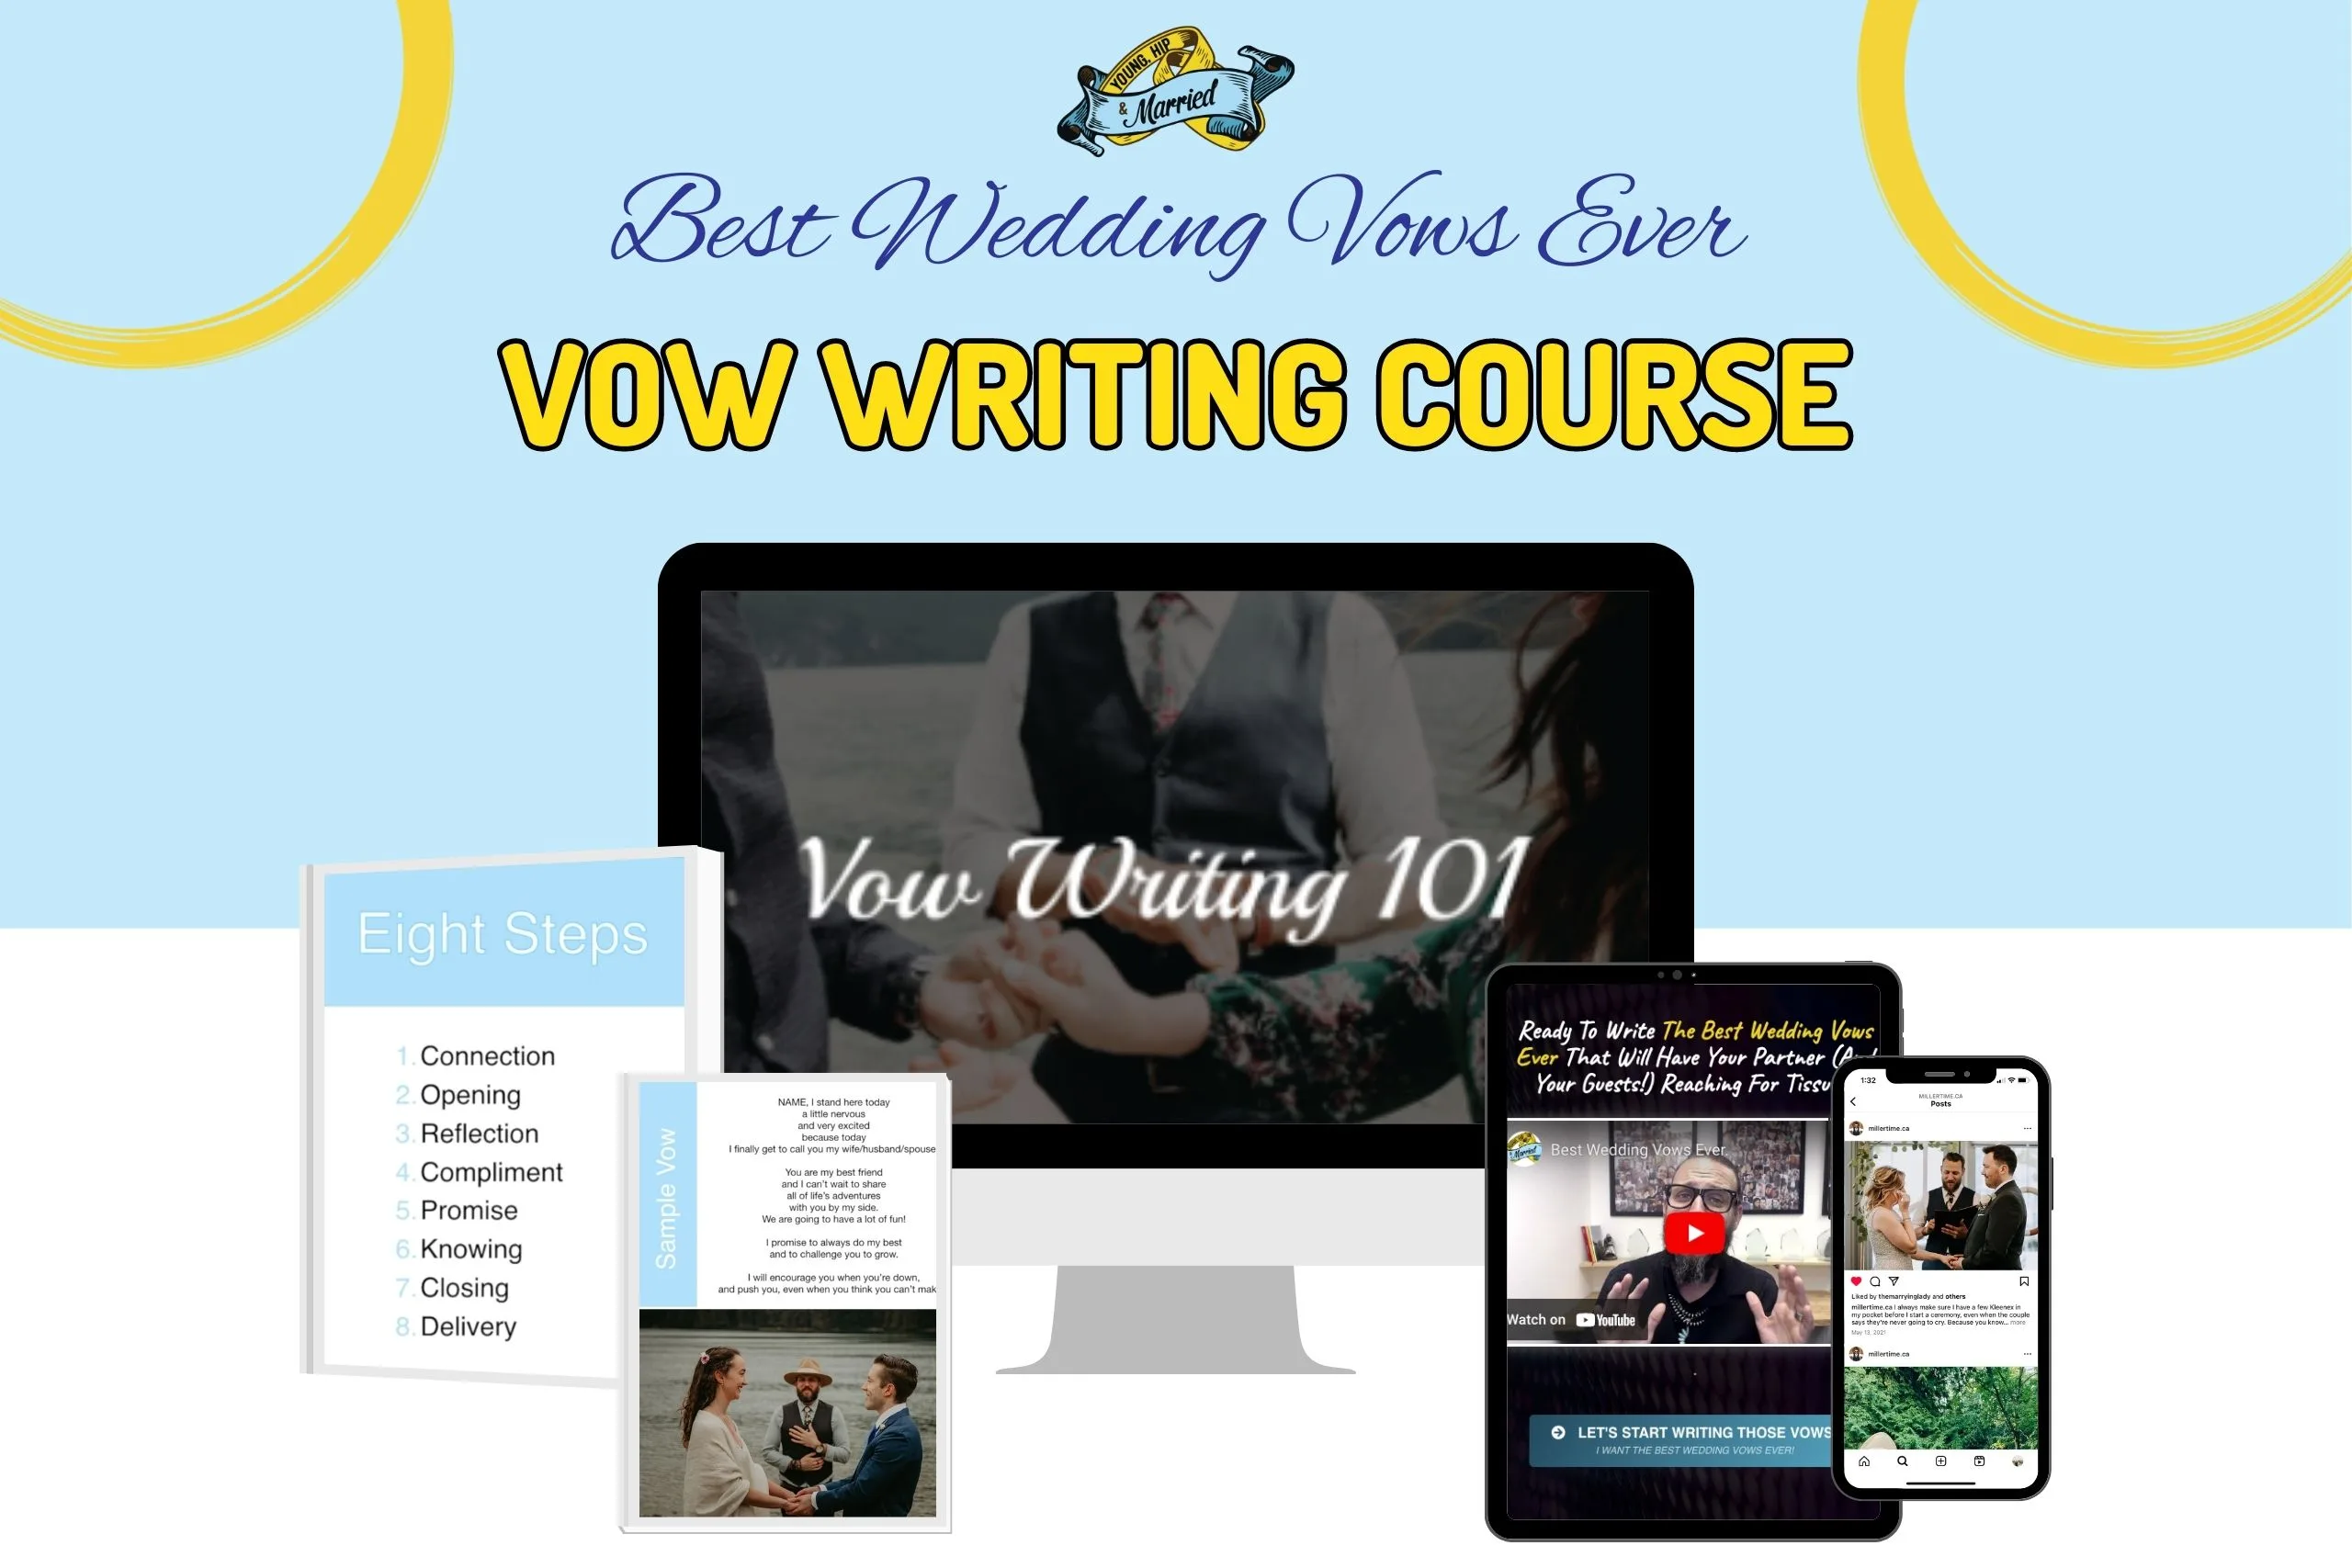 The Vow Course materials for Shawn Miller's video vow writing course with Young Hip & Married